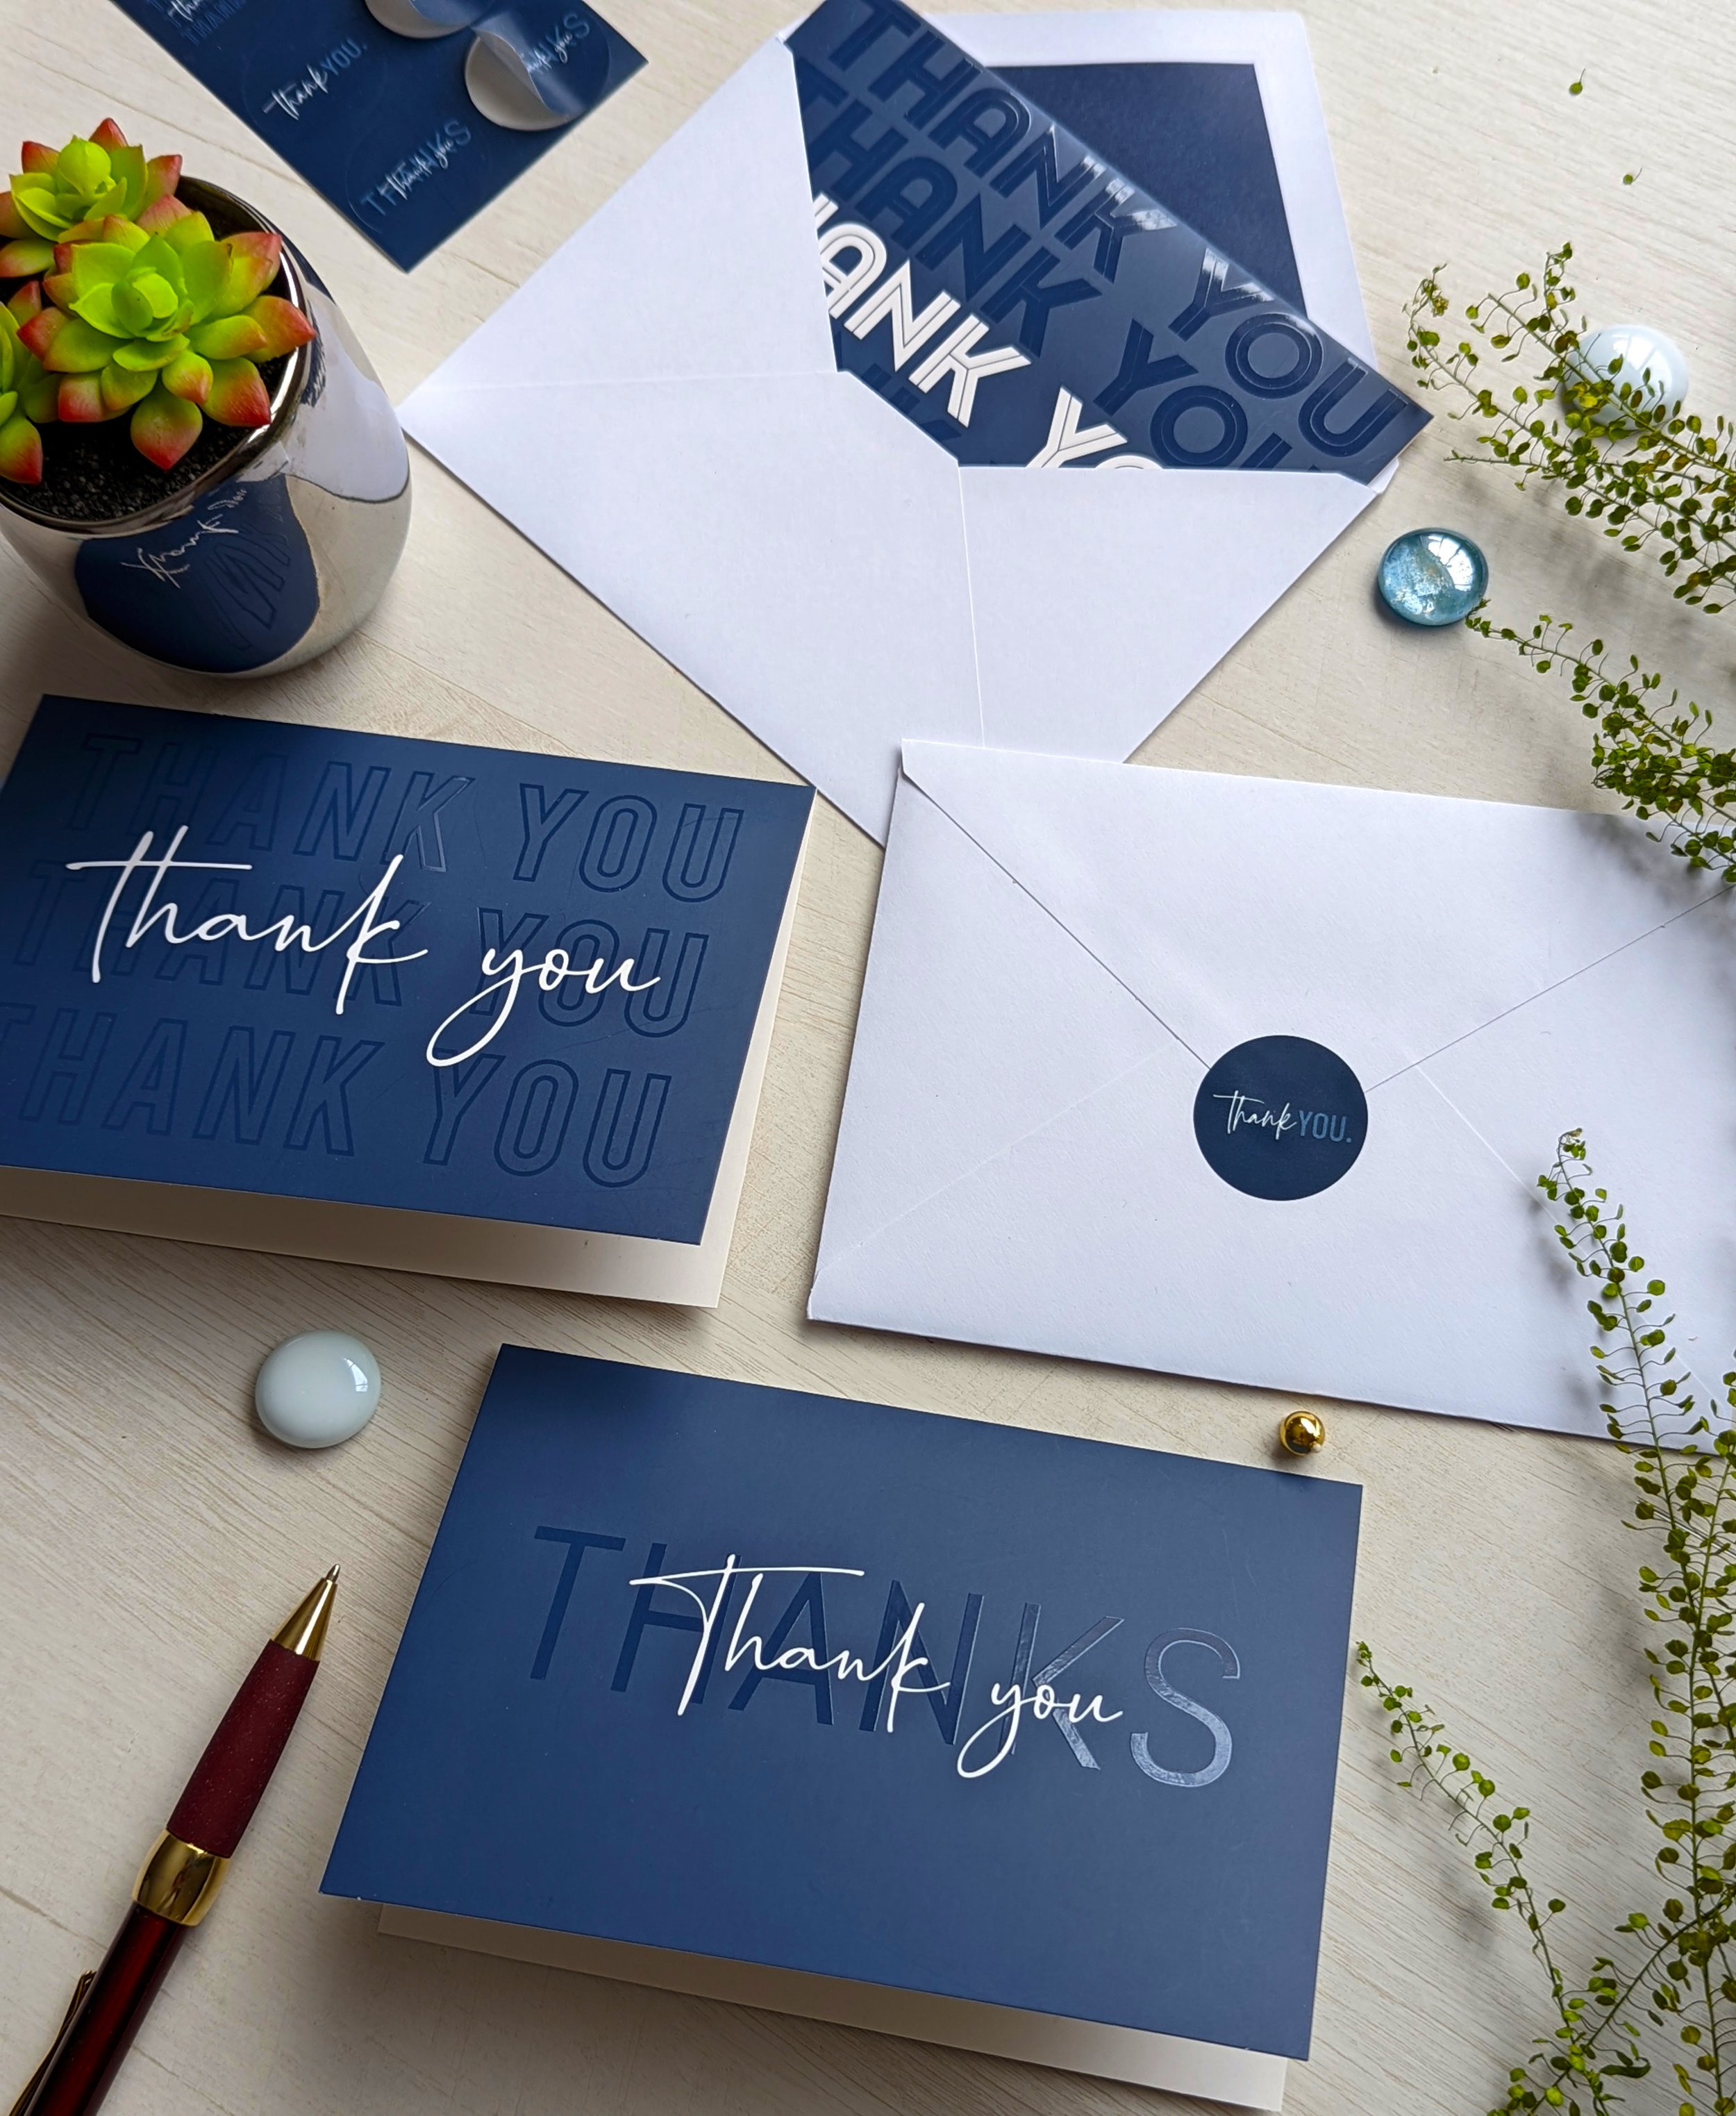 100 Thank You Cards with Envelopes and Stickers - 5 Unique Navy Blue  Designs Bulk Blank Notes Luxury UV Printing for Business, Formal and All  Occasions 4x6 Inch Blank Inside — T&M